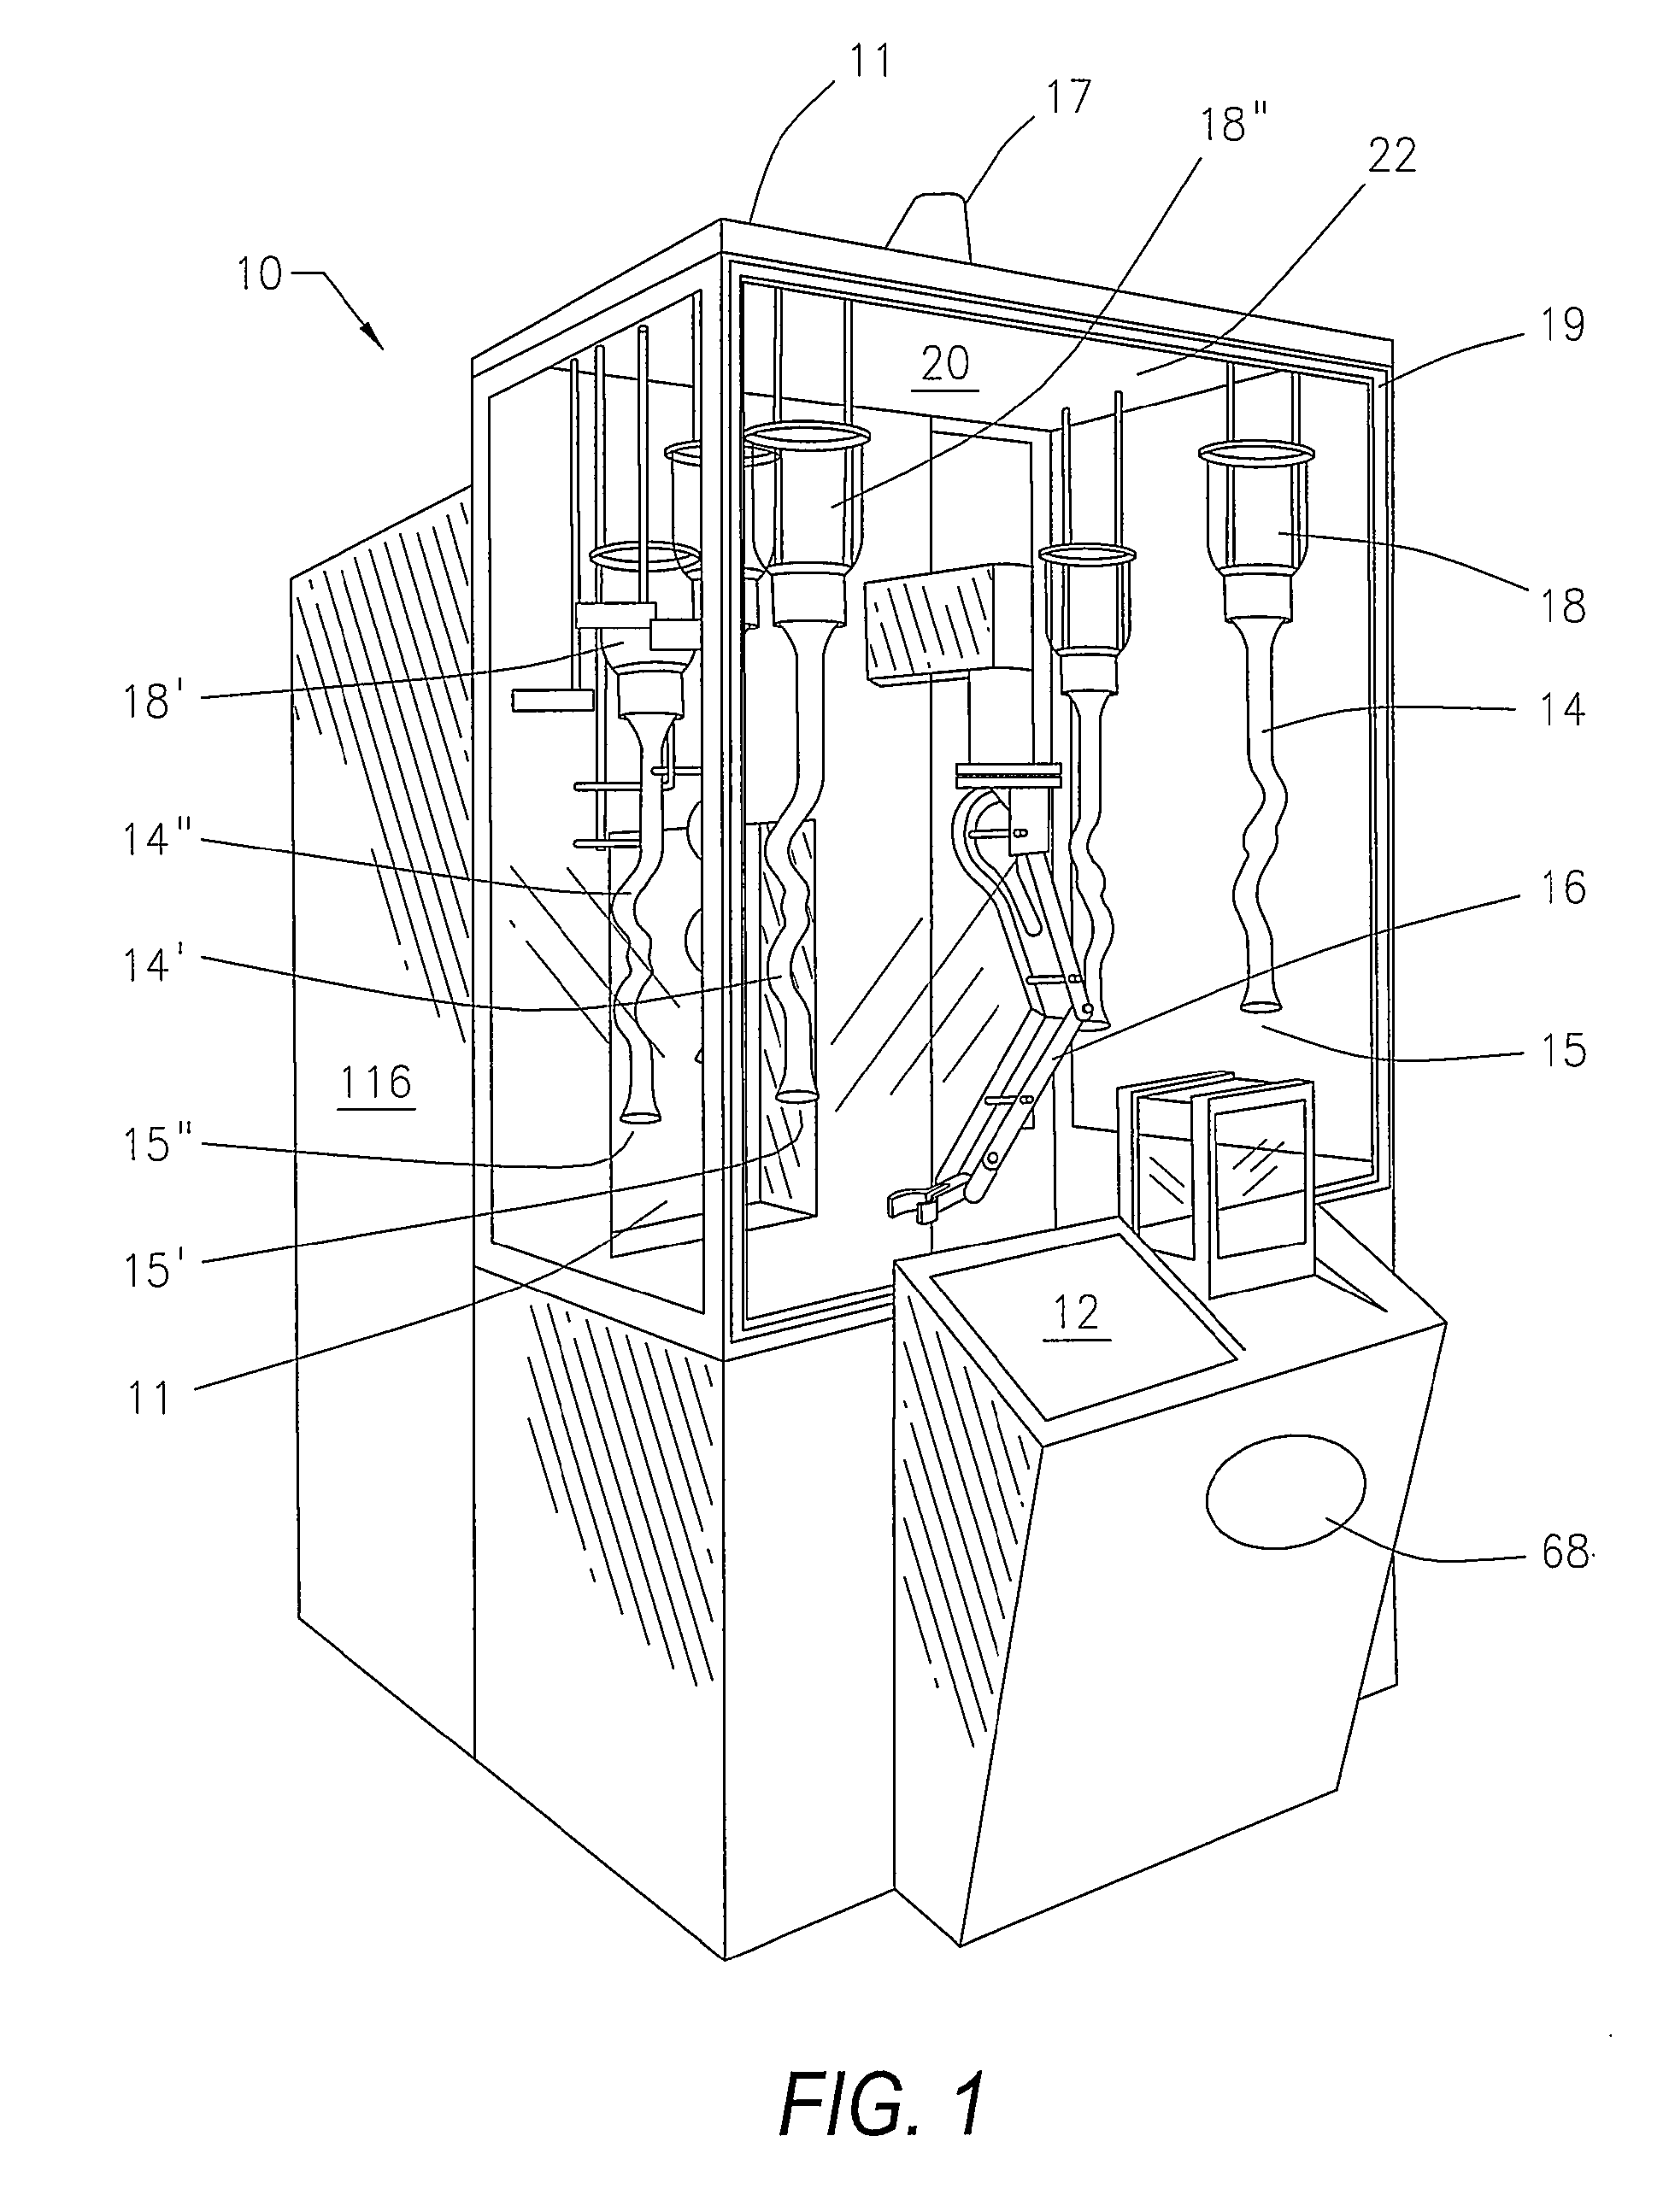 Method and apparatus for dispensing frozen confectionary